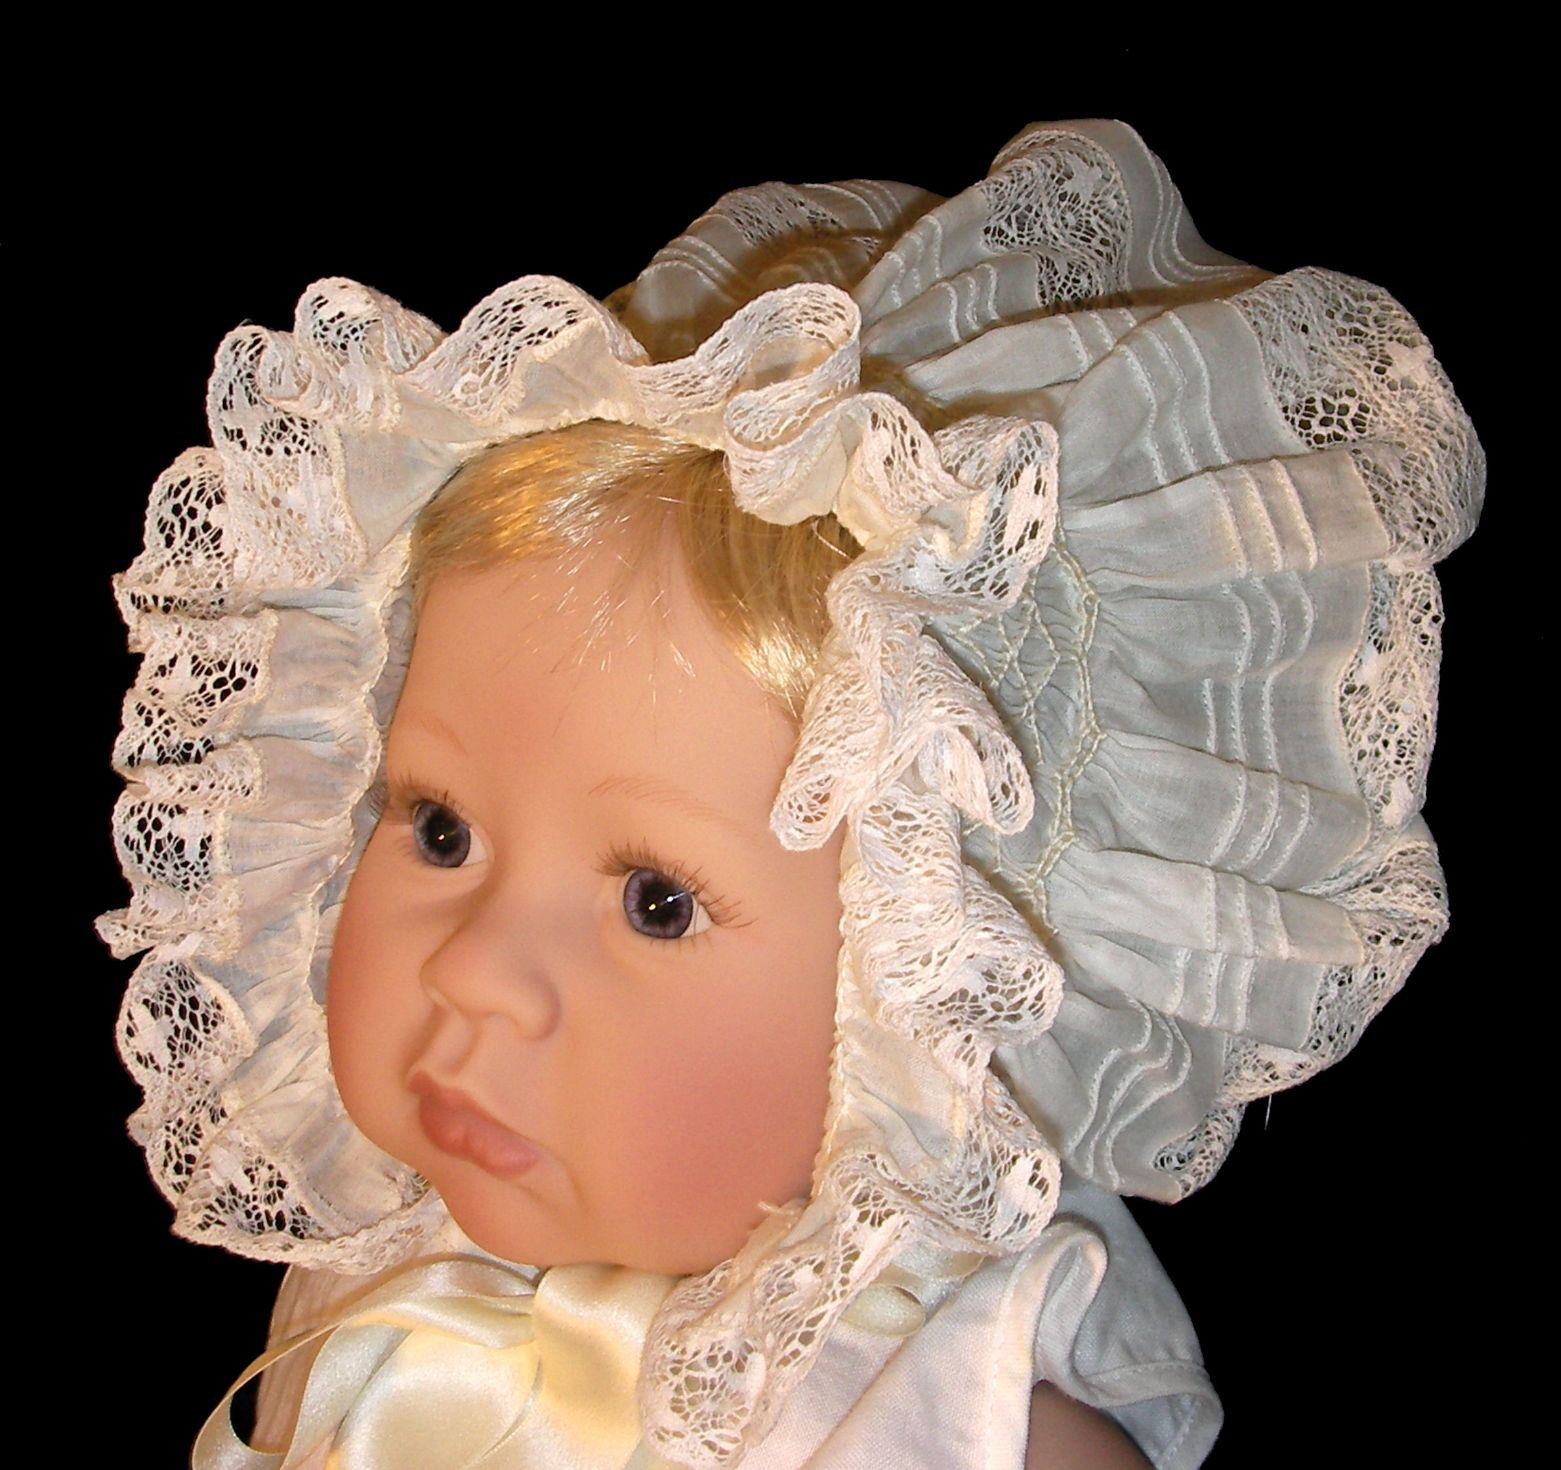 Hand Smocked _ Hand Embroidered _ Baby's Bonnet - Jean Marie FREE Shipping